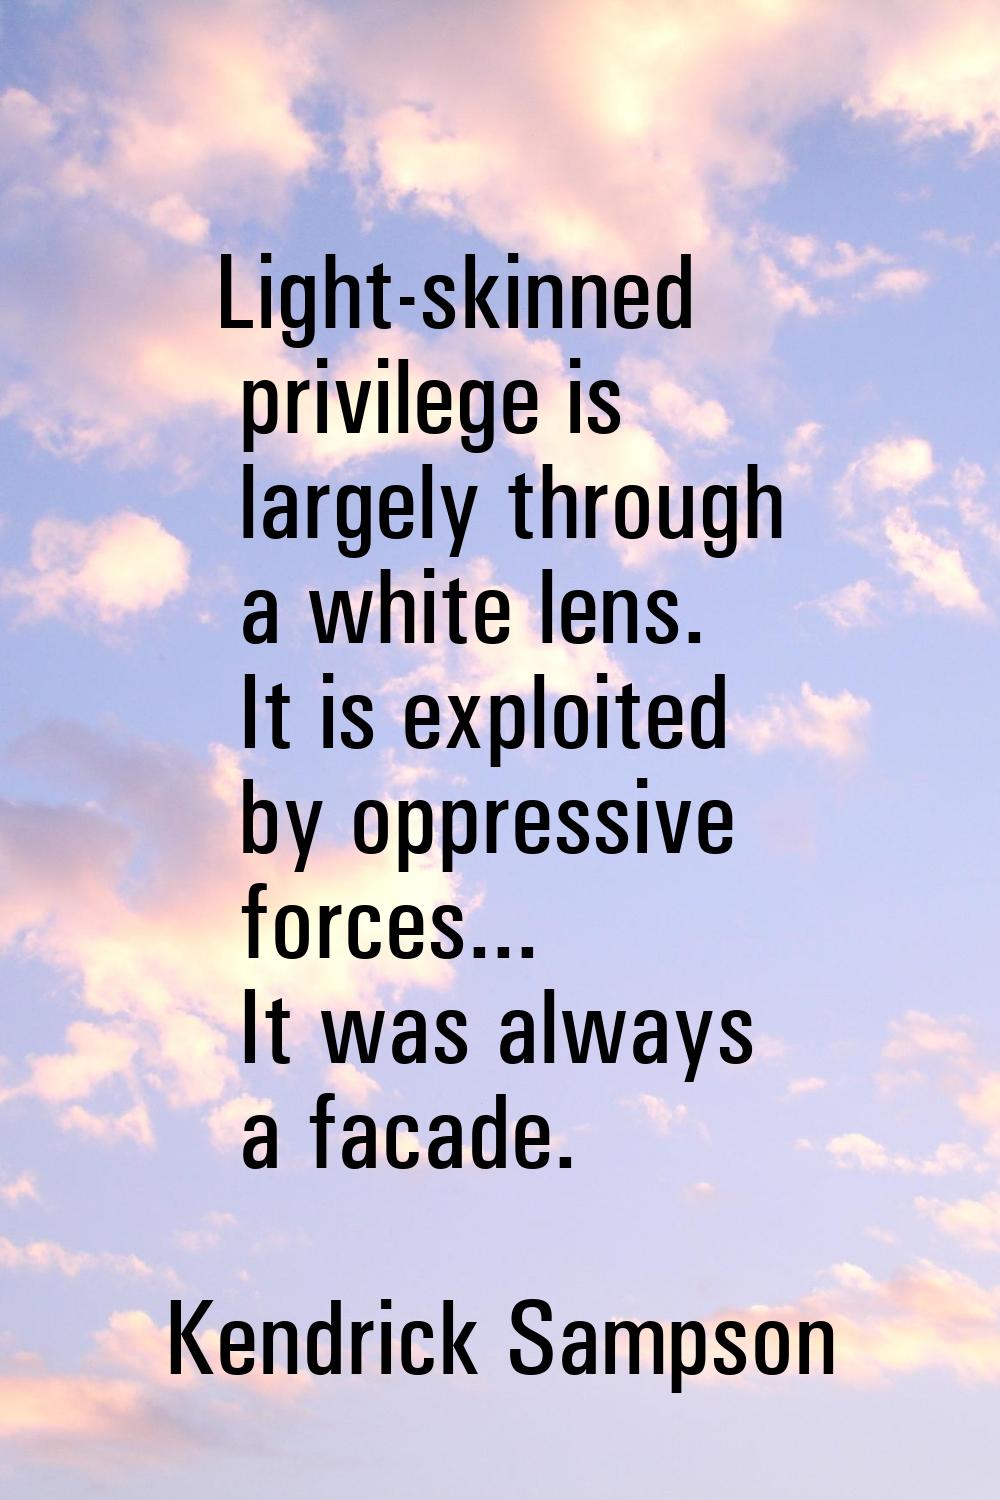 Light-skinned privilege is largely through a white lens. It is exploited by oppressive forces... It